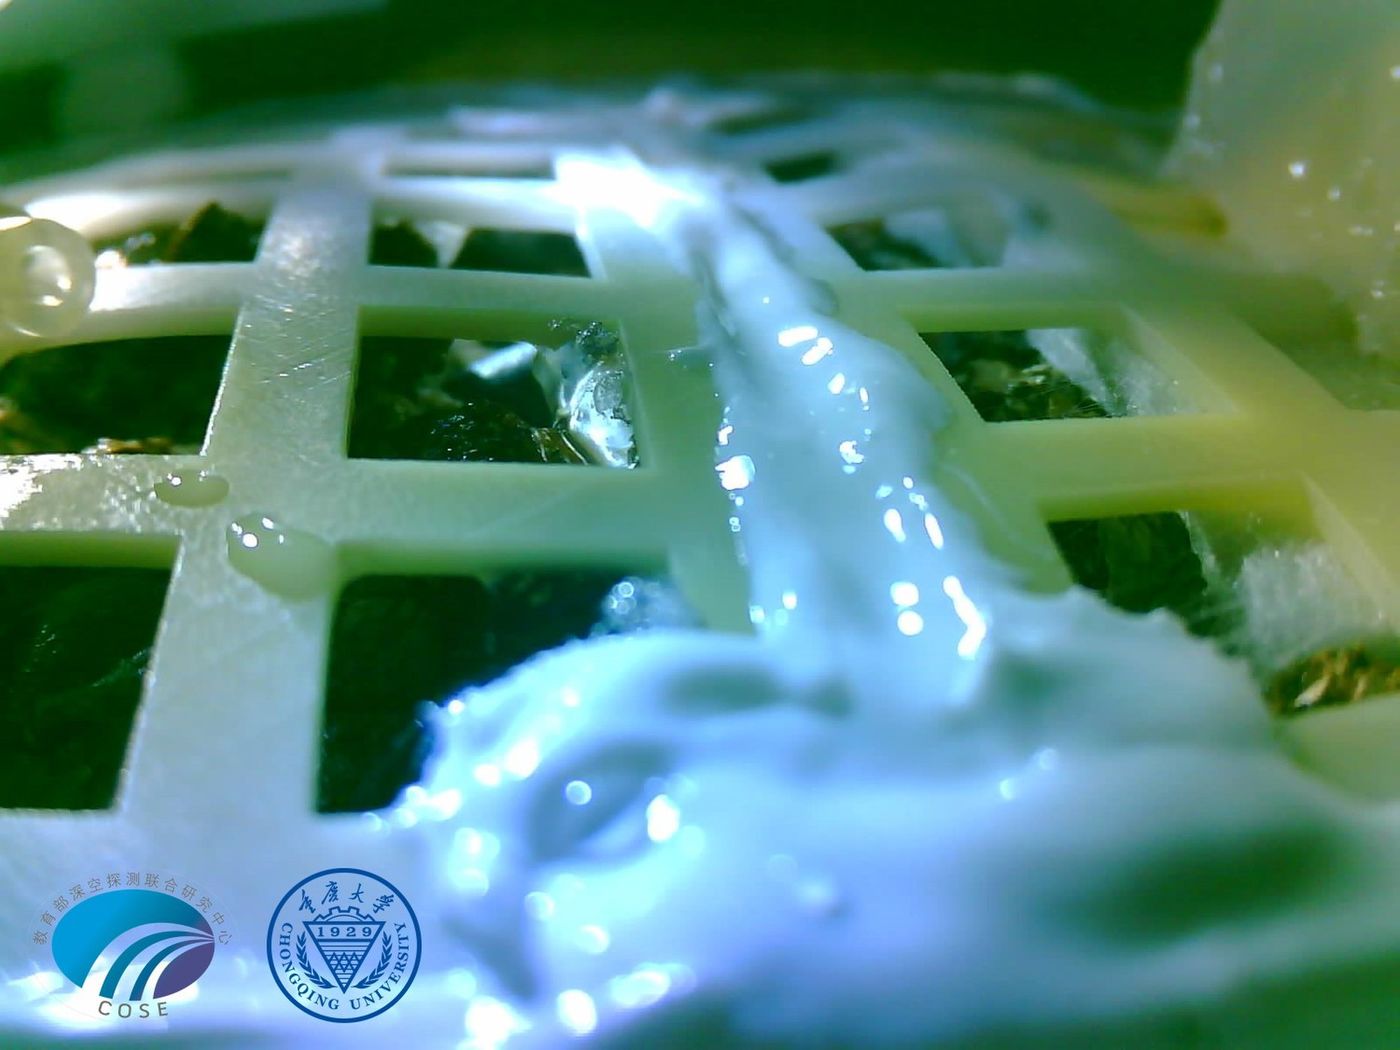 A small cotton plant begins to sprout from a seed inside of a sealed biosphere on the lunar surface.